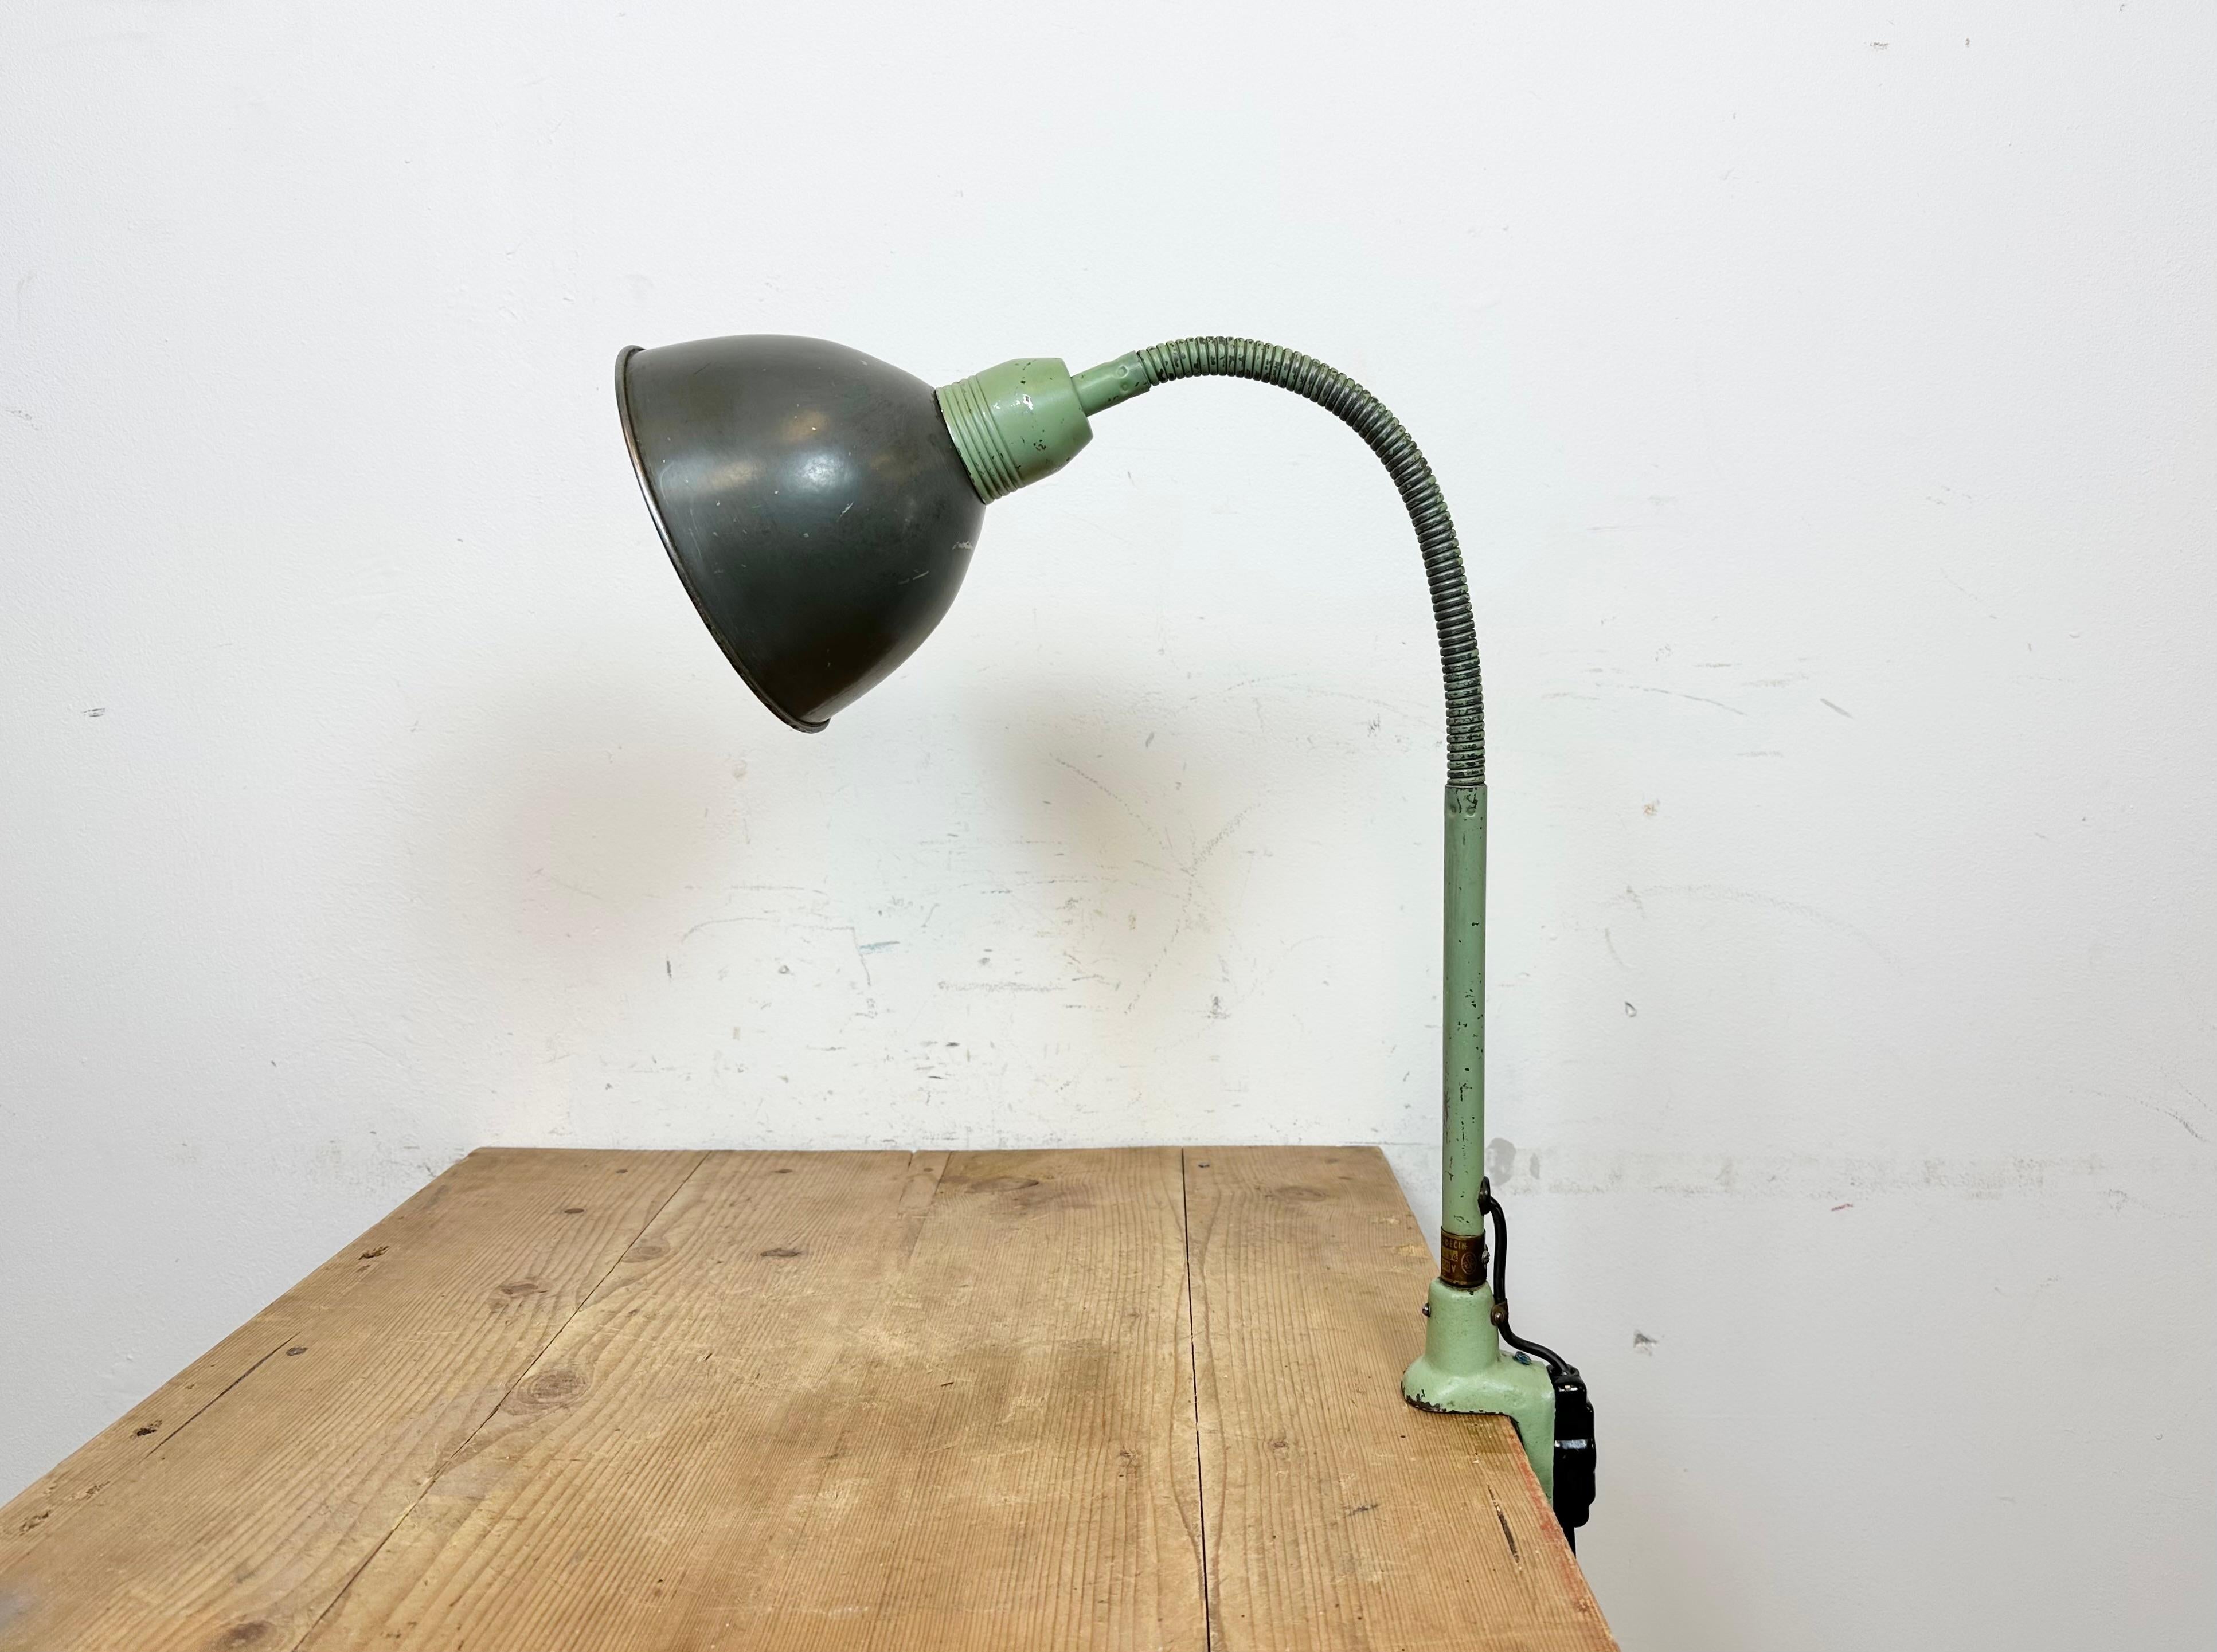 Industrial flexible gooseneck table lamp with clamp base made by Instala Decín in former Czechoslovakia during the 1960s. Good vintage condition. The socket requires standard E 27 / E26 light bulbs. The lampshade diameter is 17 cm.
The weight of the